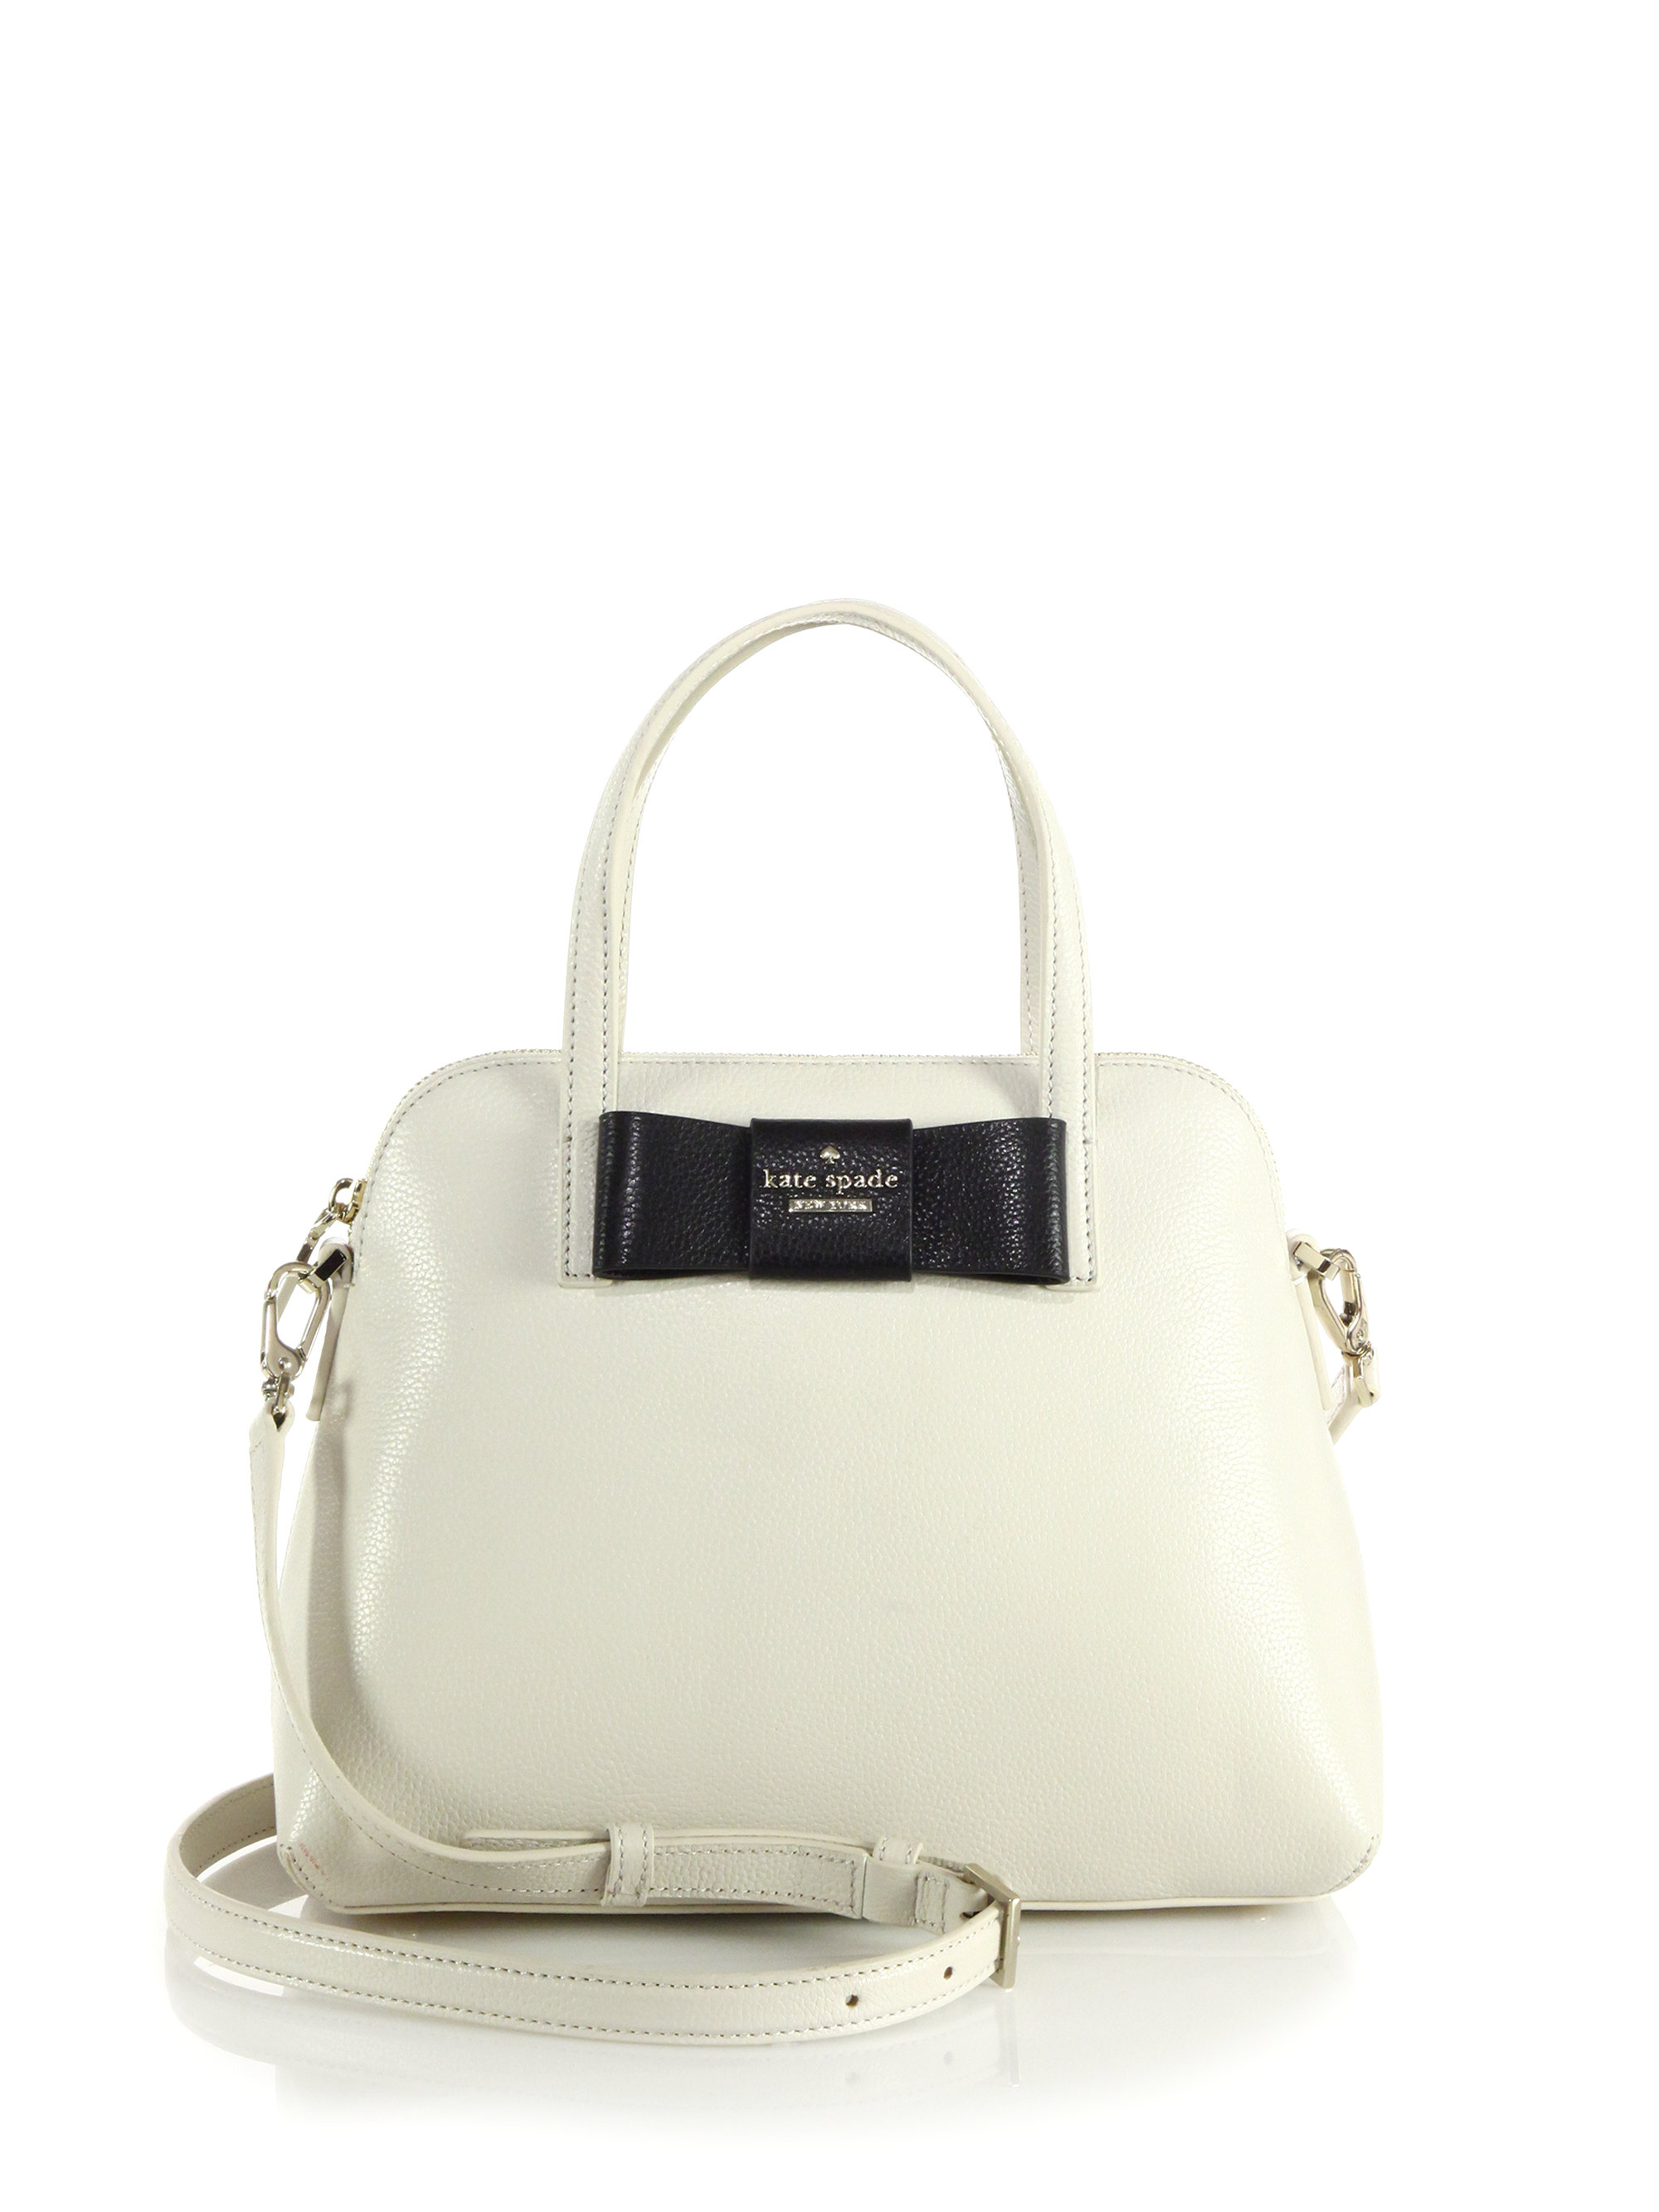 Kate Spade Julia Leather Maise Satchel in White (ivory)